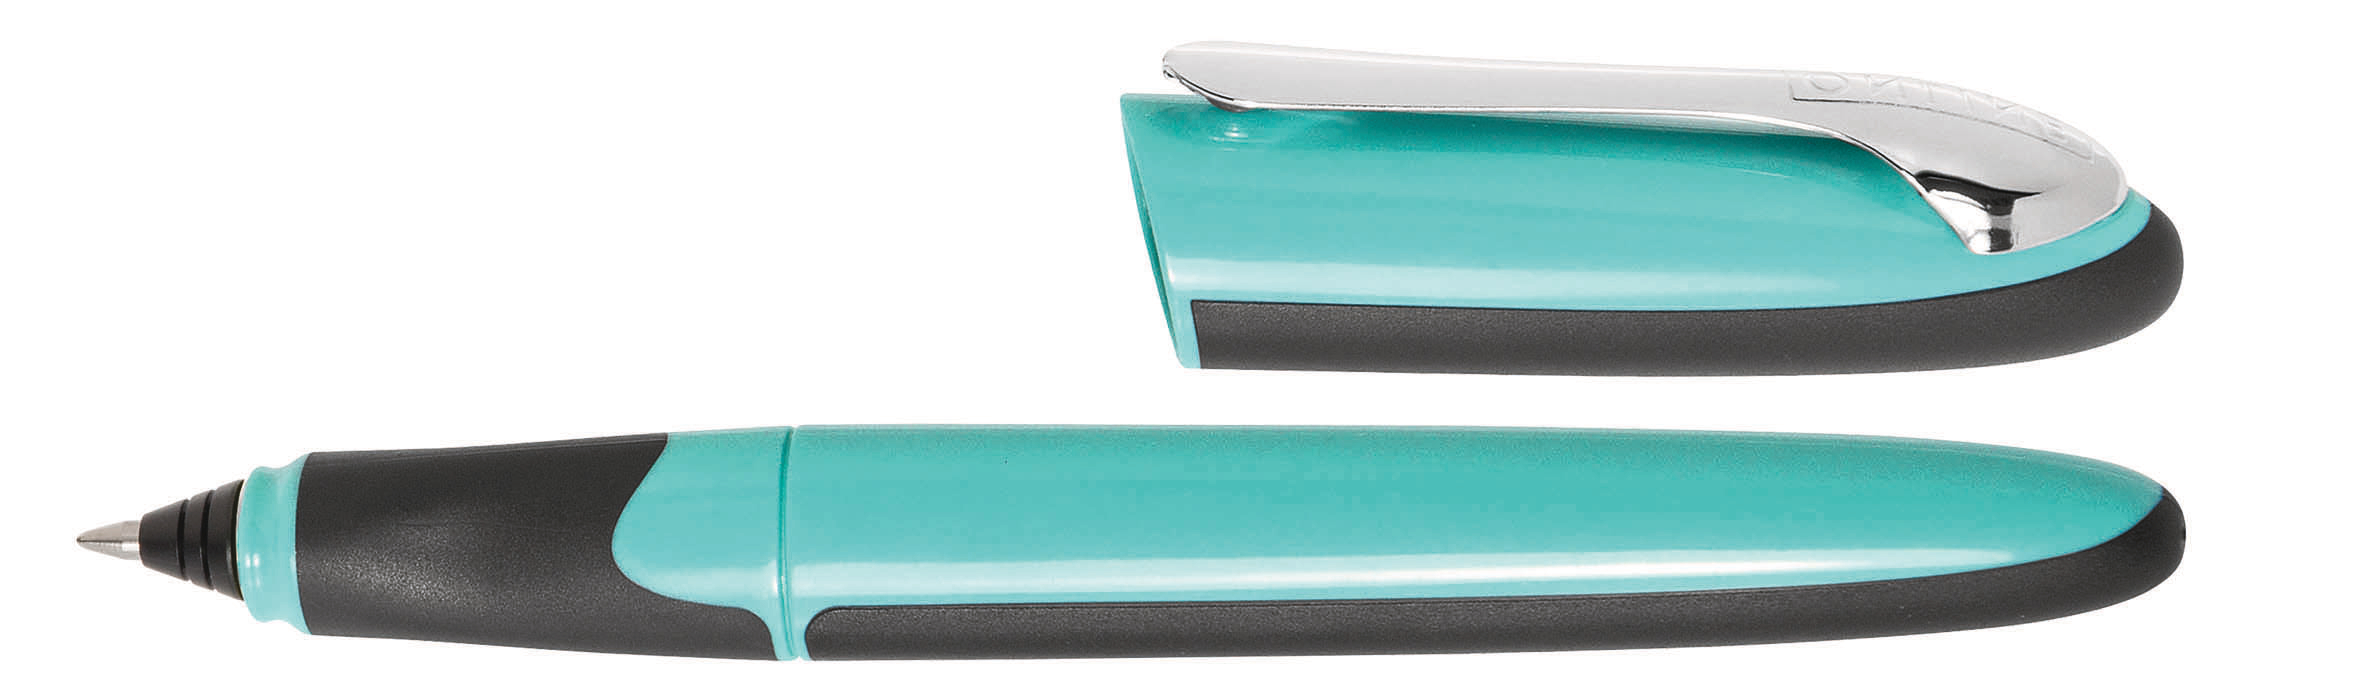 ONLINE Cartouche Rollerball 0.7mm 20088/3D Air best of Turquoise